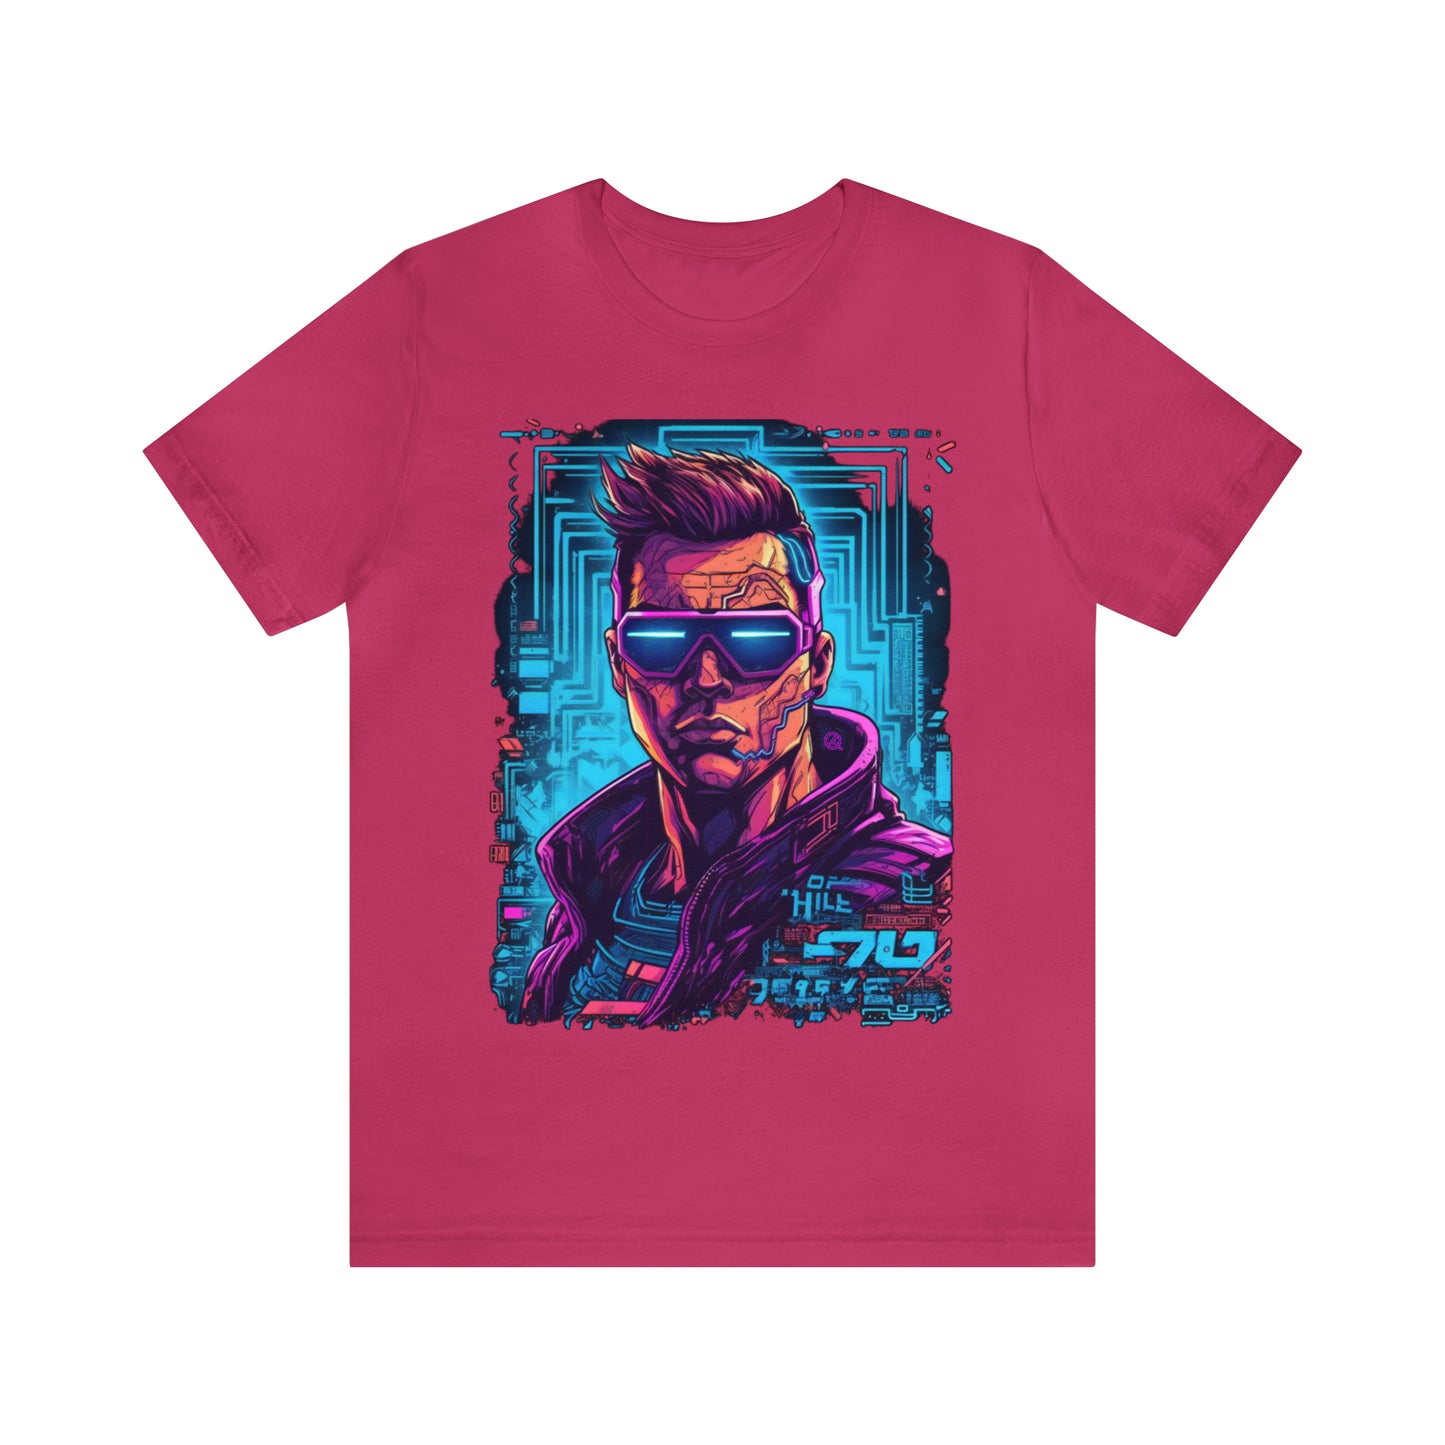 berry-quest-thread-tee-shirt-with-large-neon-cyber-punk-on-center